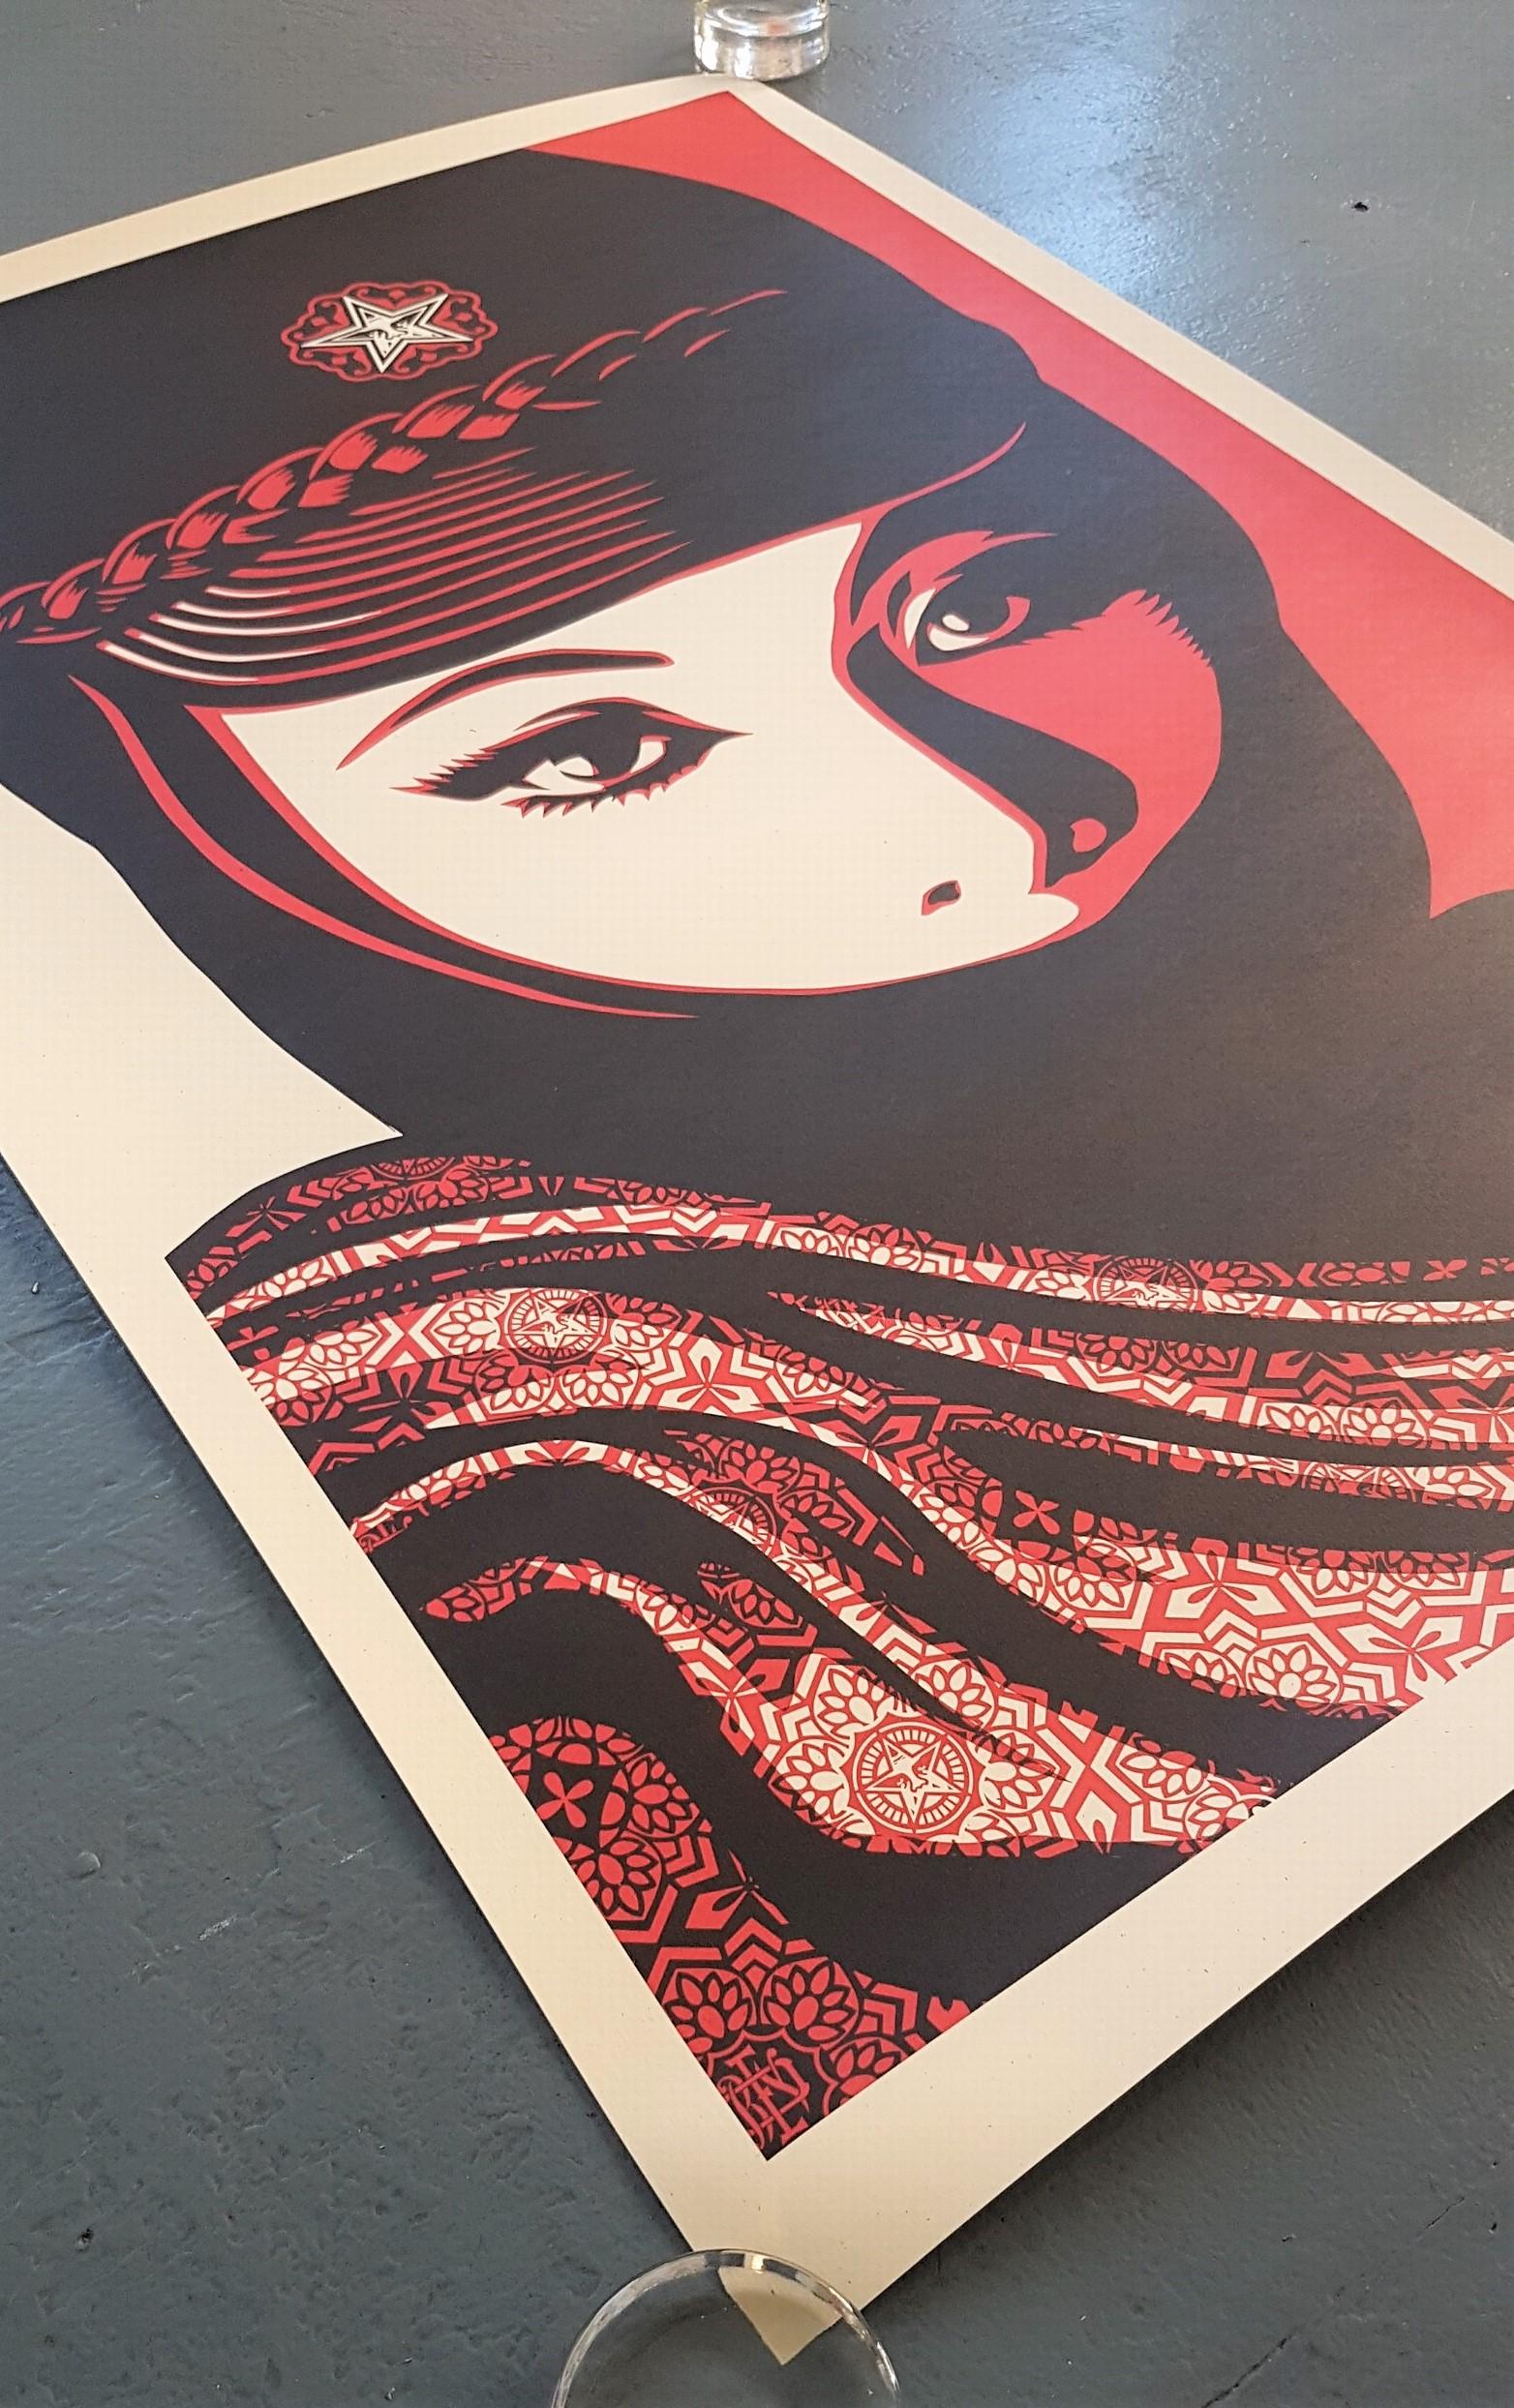 Shepard Fairey
Mujer Fatale
Offset lithograph on paper
Year: 2019-2022
Signed and dated by hand
Size: 33.7 × 22.2 on 35.7 × 23.8 inches

*Sample image. Year might differ from the year shown on the listing image.

Frank Shepard Fairey (born February